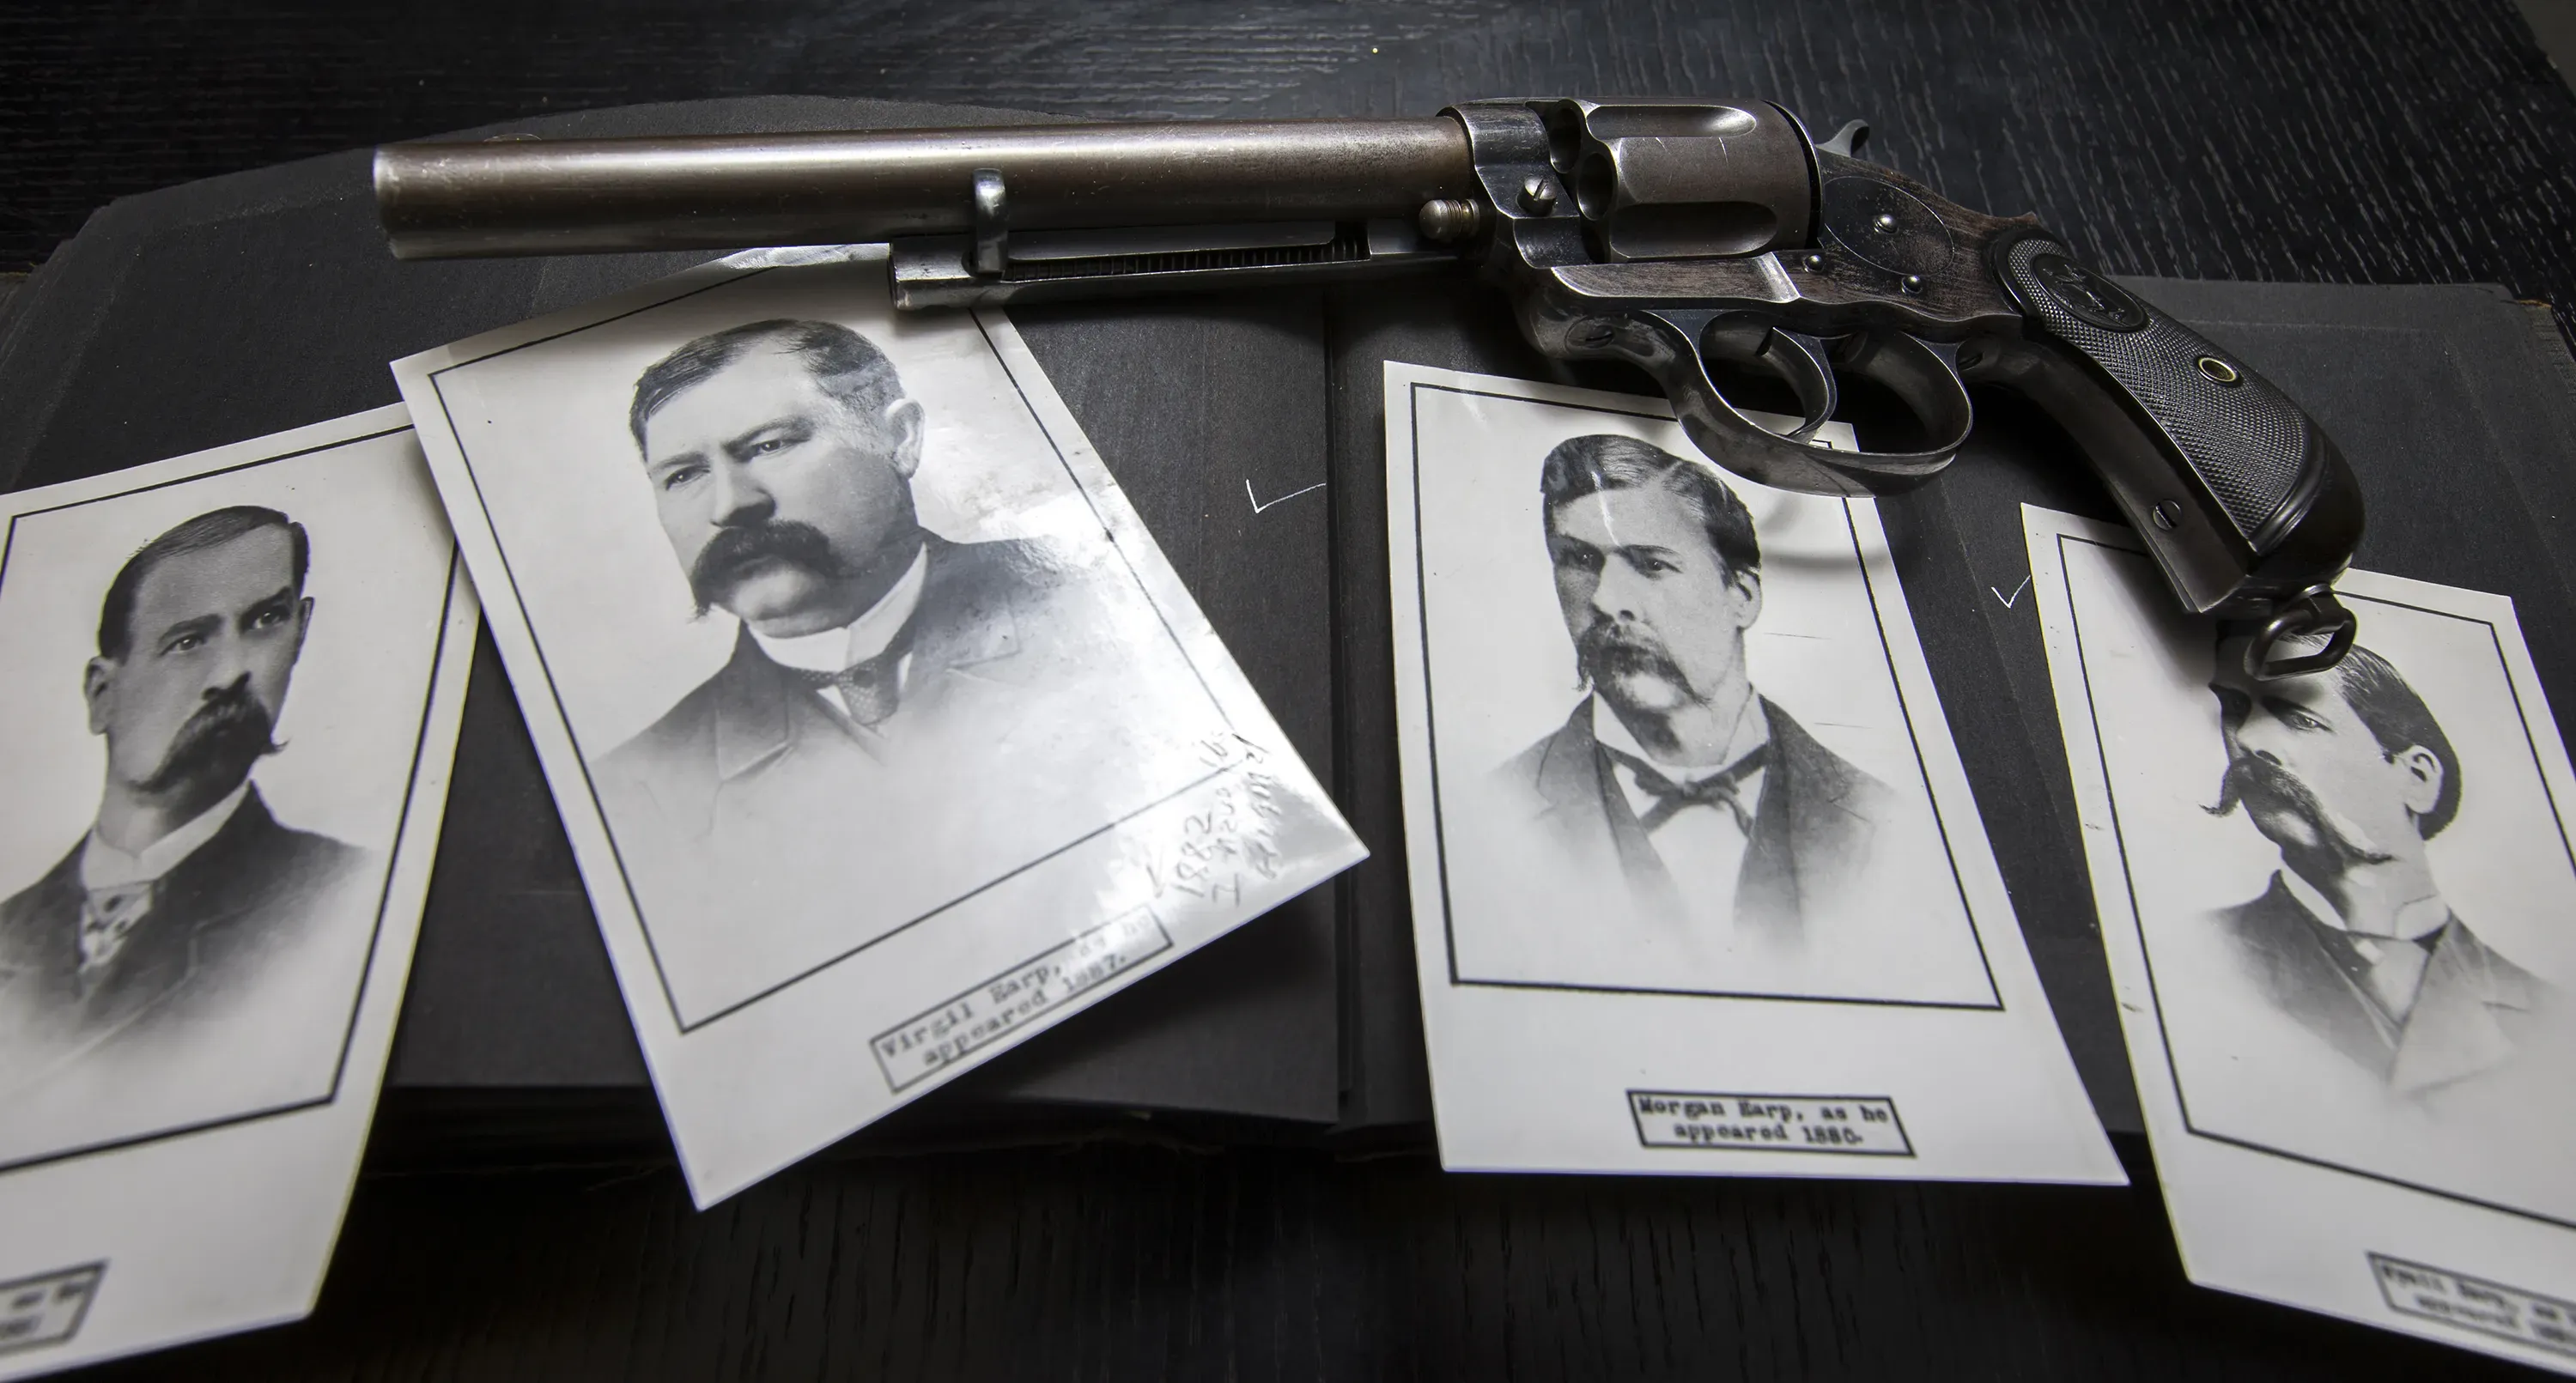 Virgil Earp of O.K. Corral fame (second from left, pictured with brothers James, Morgan and Wyatt, along with Virgil's Colt pistol) is the first recorded constable in Phoenix. The well-known gunfighter won his seat as Prescott's constable in 1878.